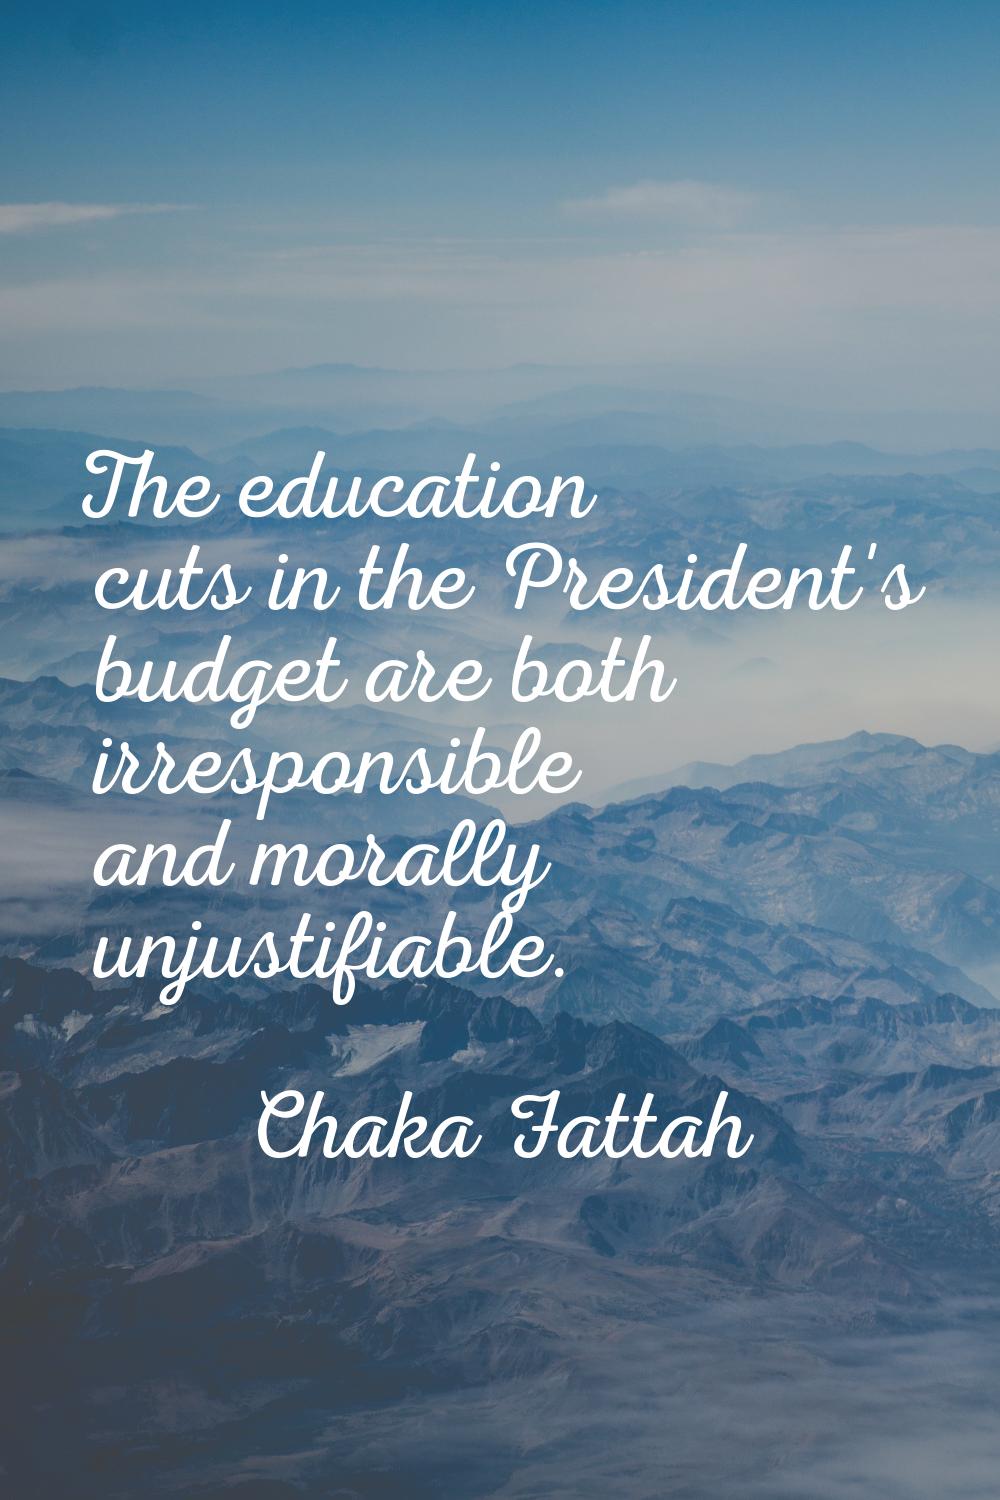 The education cuts in the President's budget are both irresponsible and morally unjustifiable.